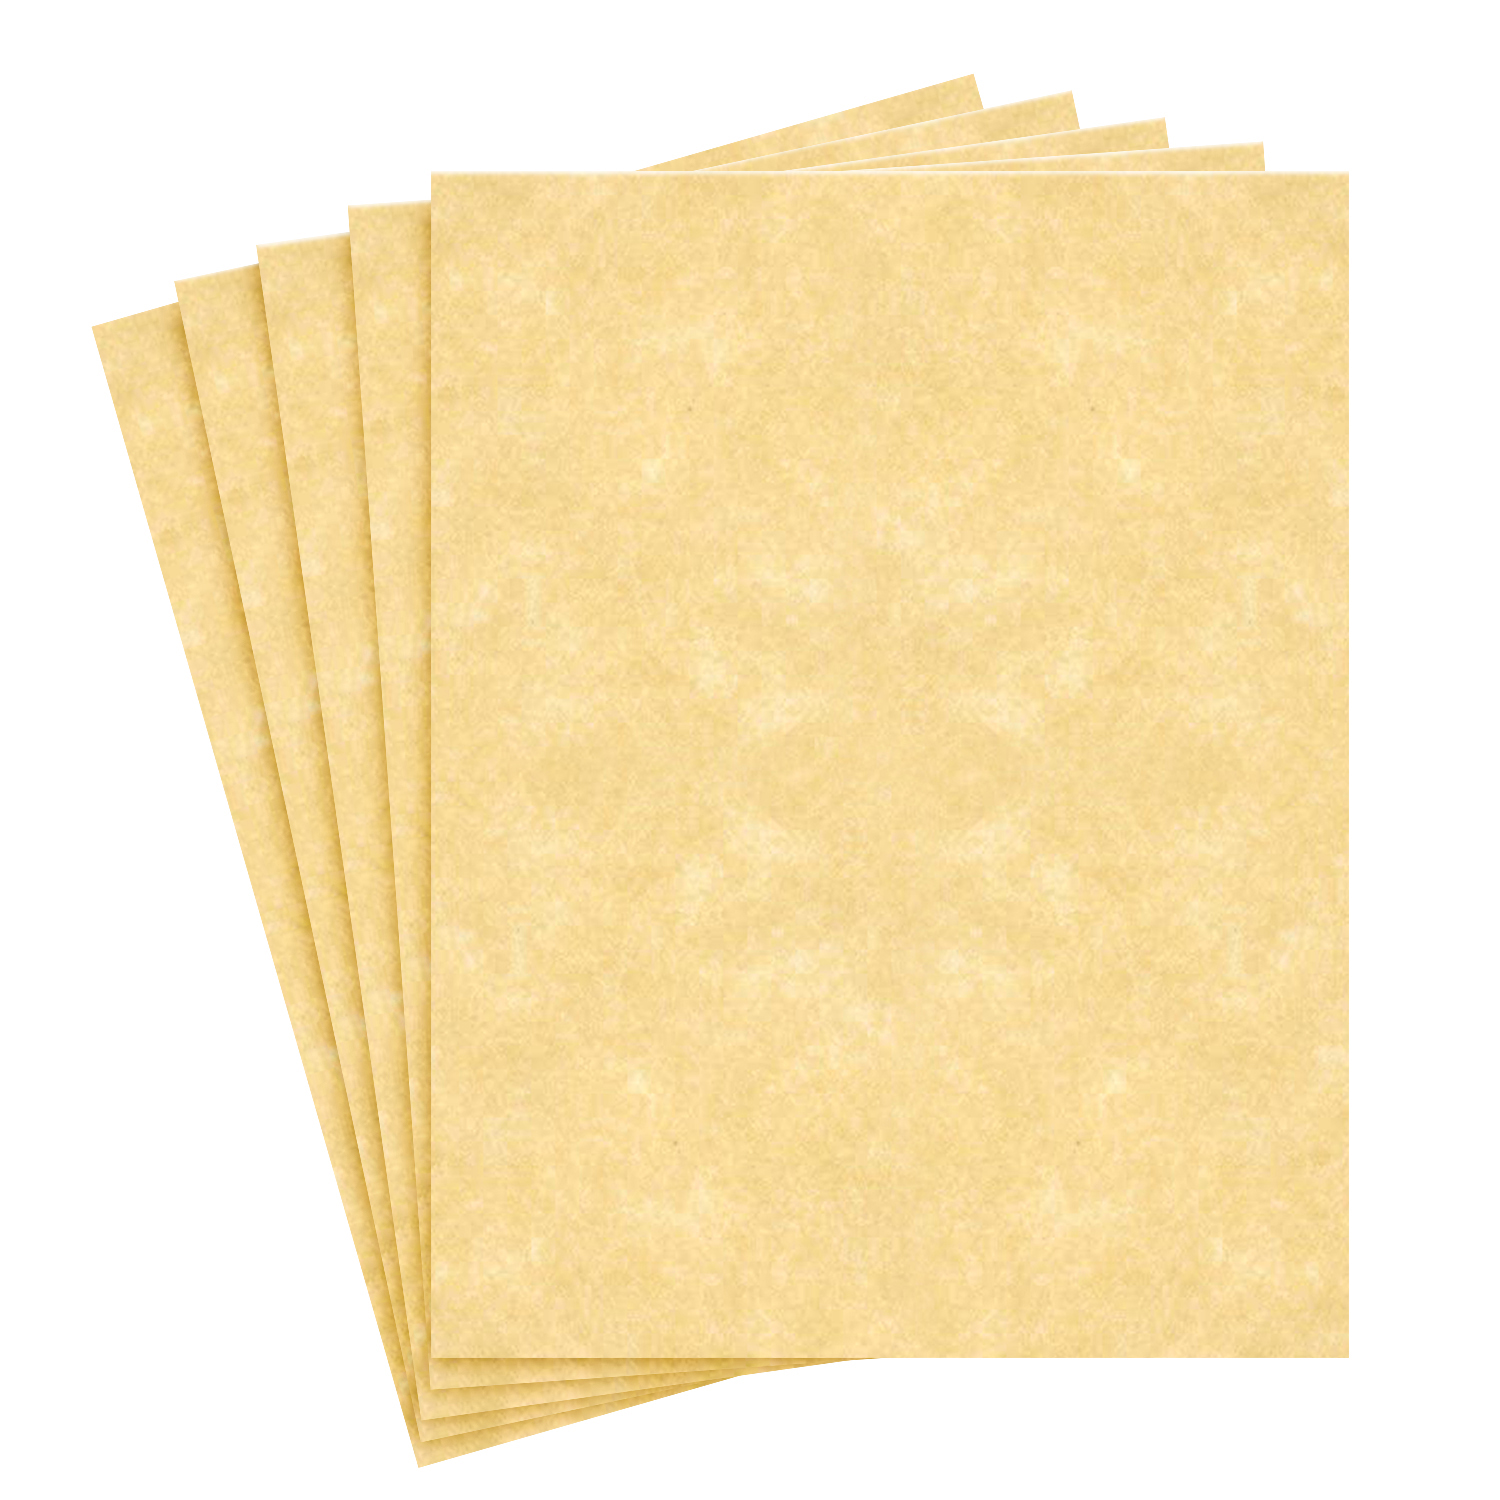 New Champagne Stationery Parchment Paper - Great for Writing, Certificates,  Menus and Wedding Invitations | 24lb Bond Paper | 8.5 x 11 | 50 Sheets